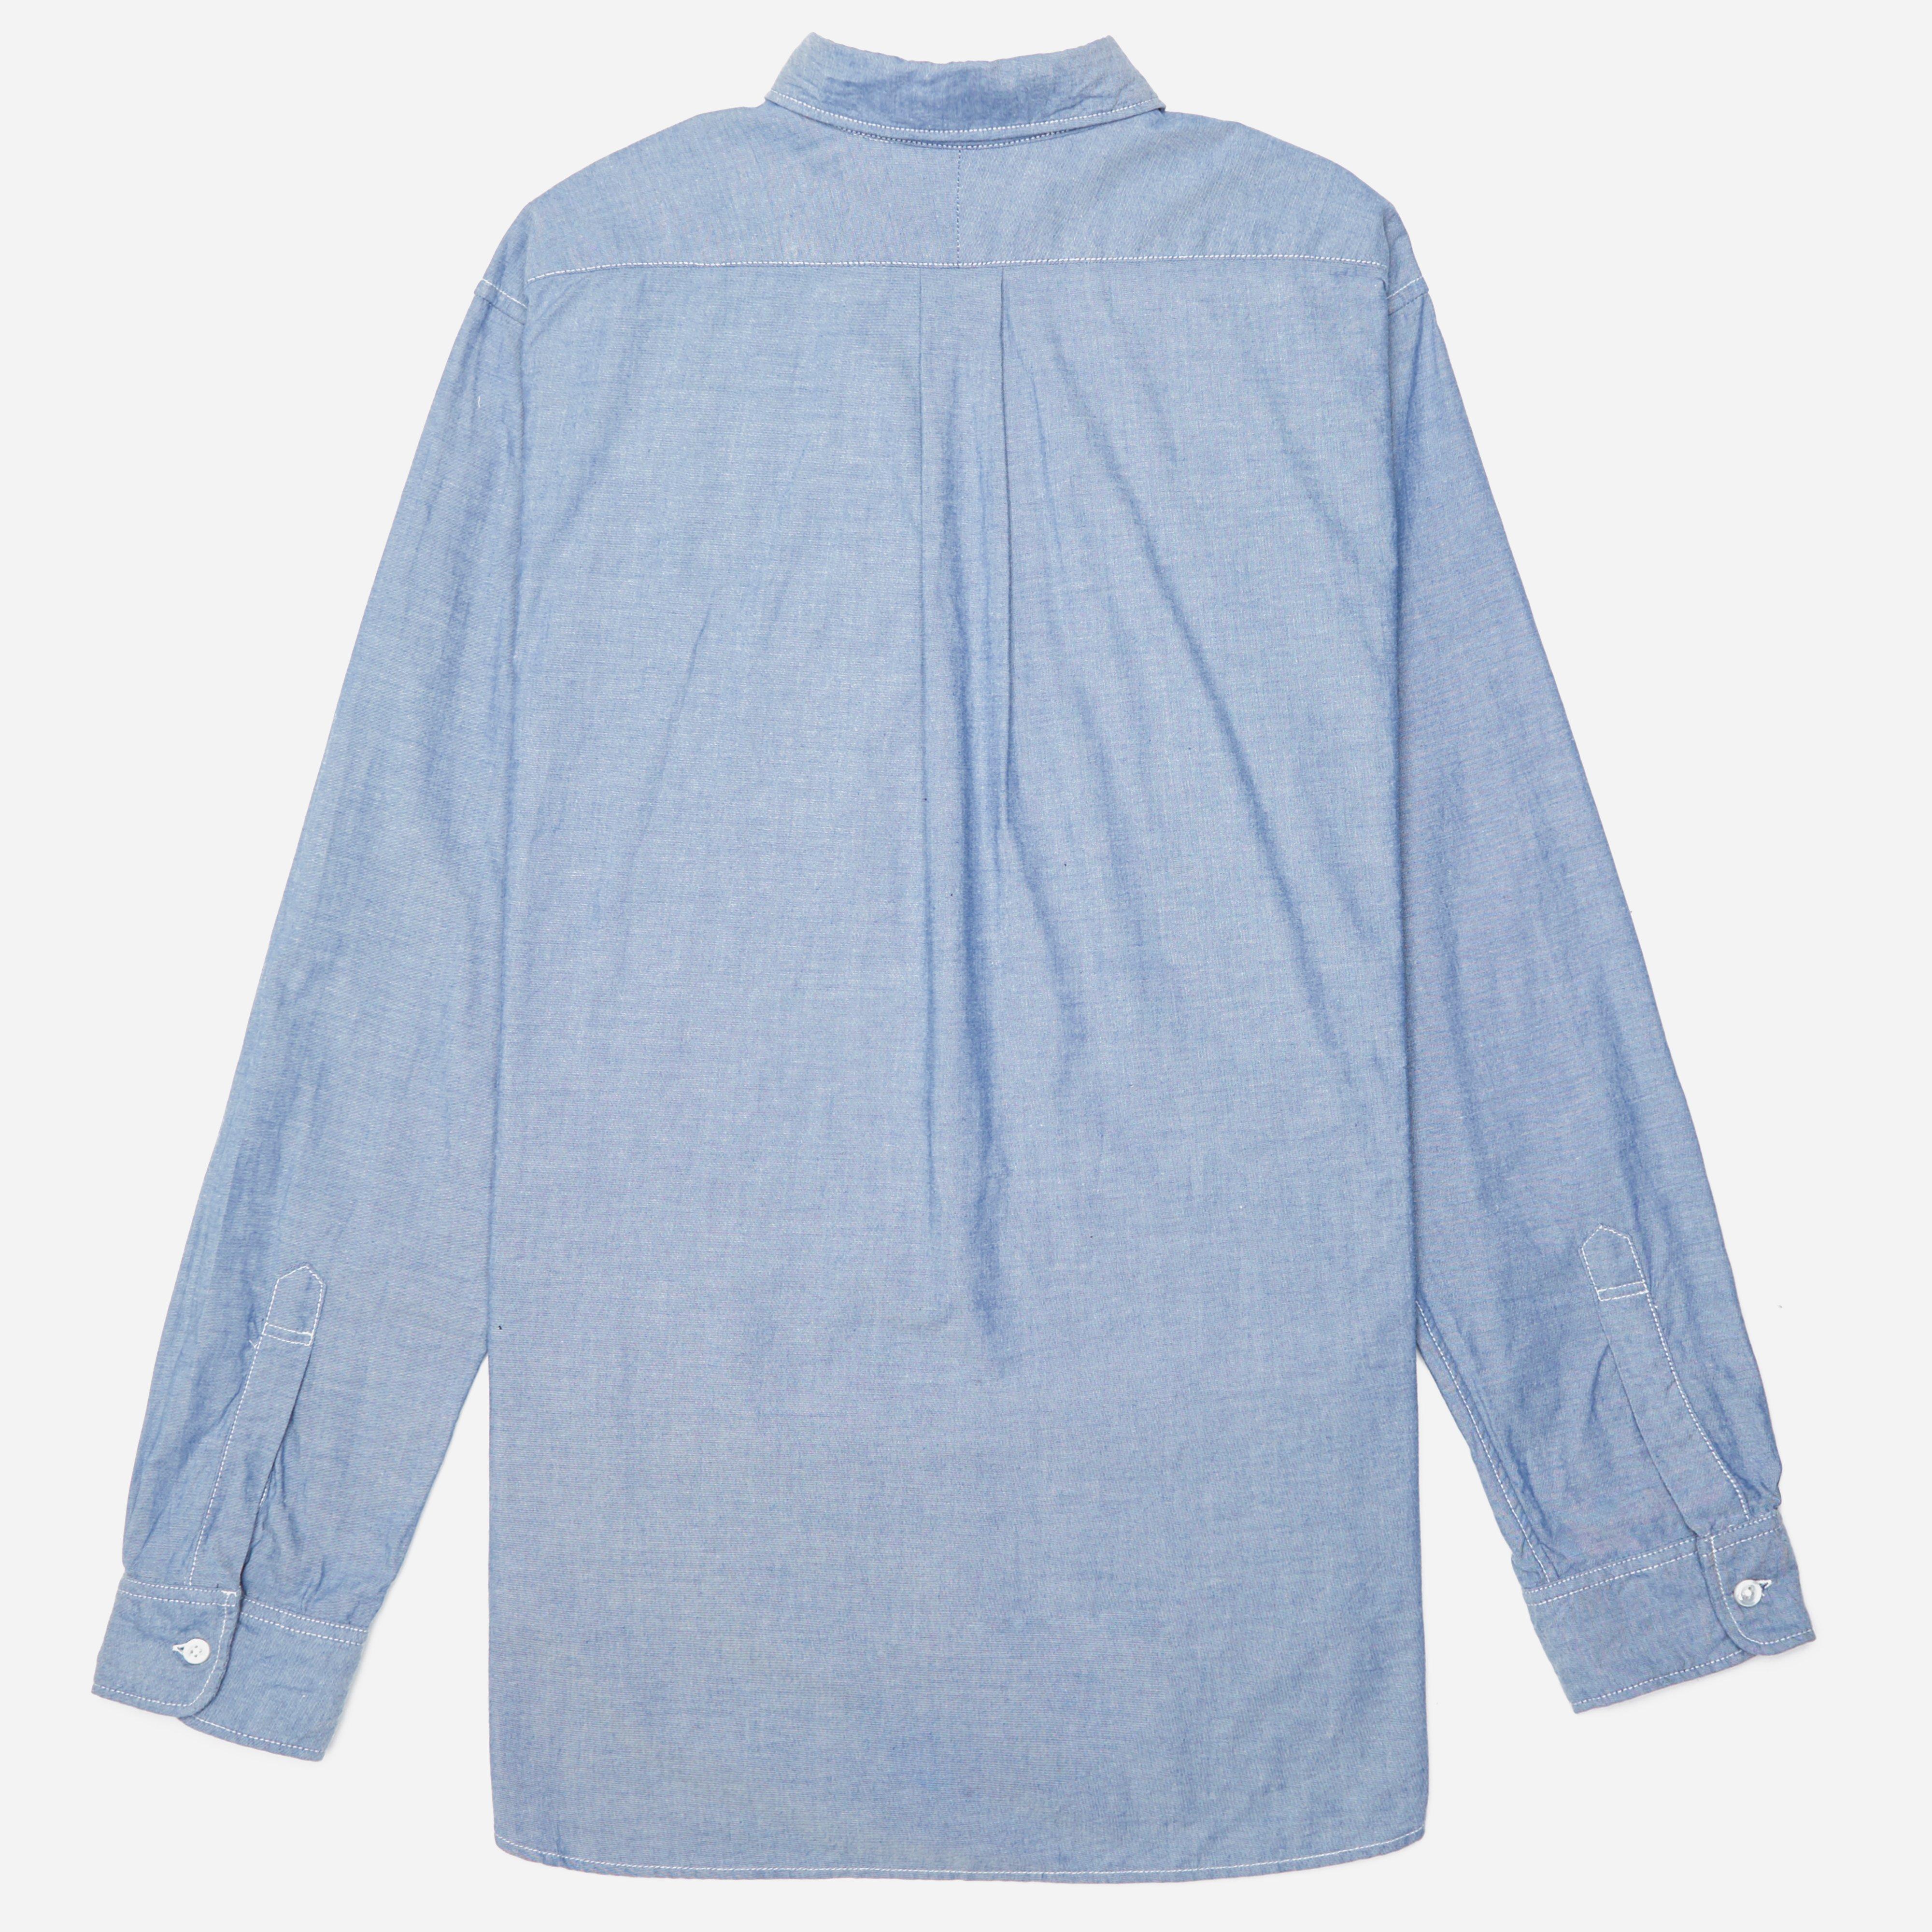 Lyst - Engineered Garments 19th Century Bd Shirt - Cotton Chambray in ...